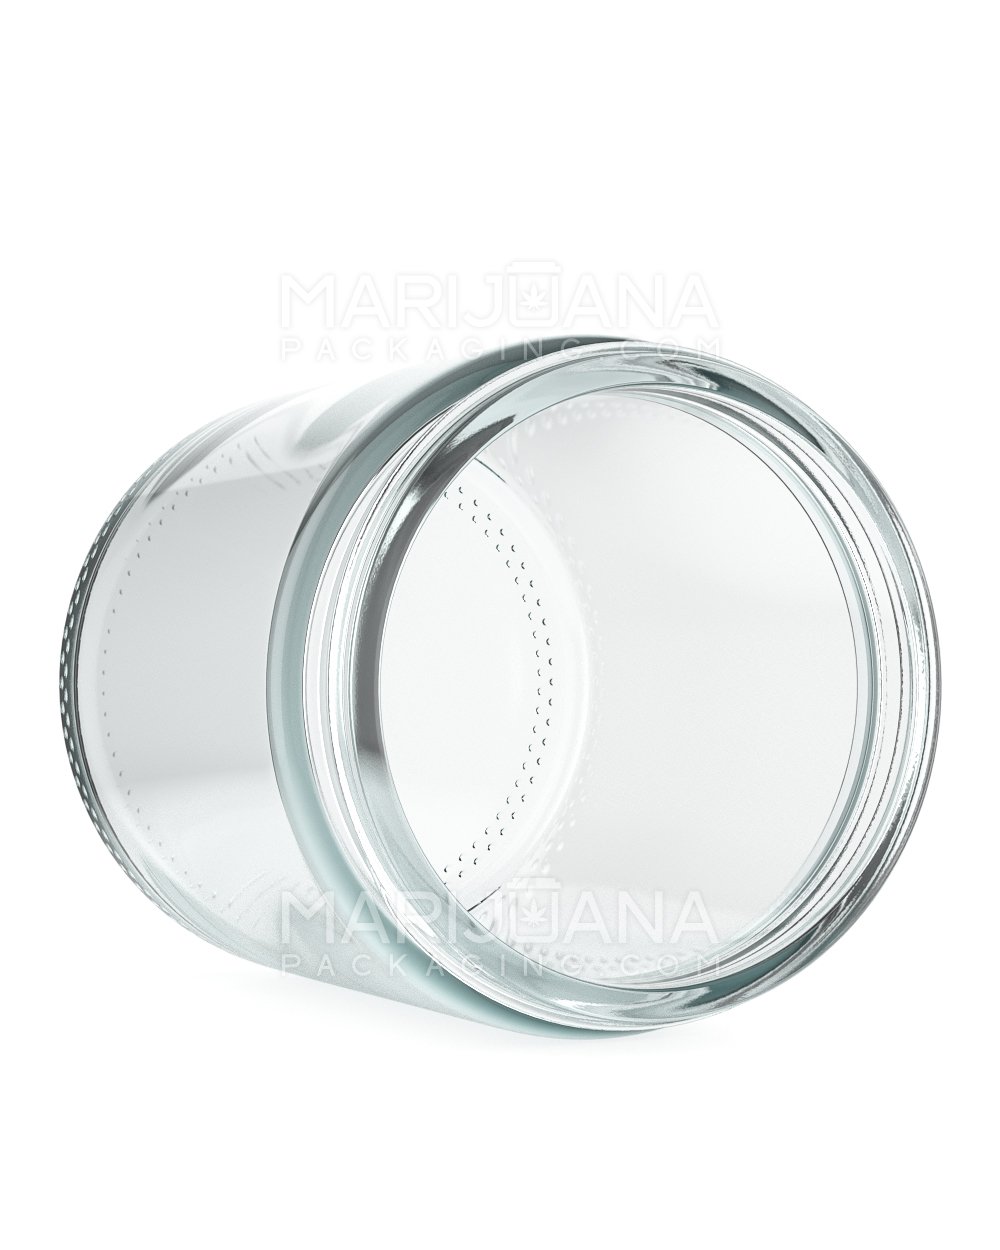 Straight Sided Clear Glass Jars | 70mm - 8oz - 24 Count - 4